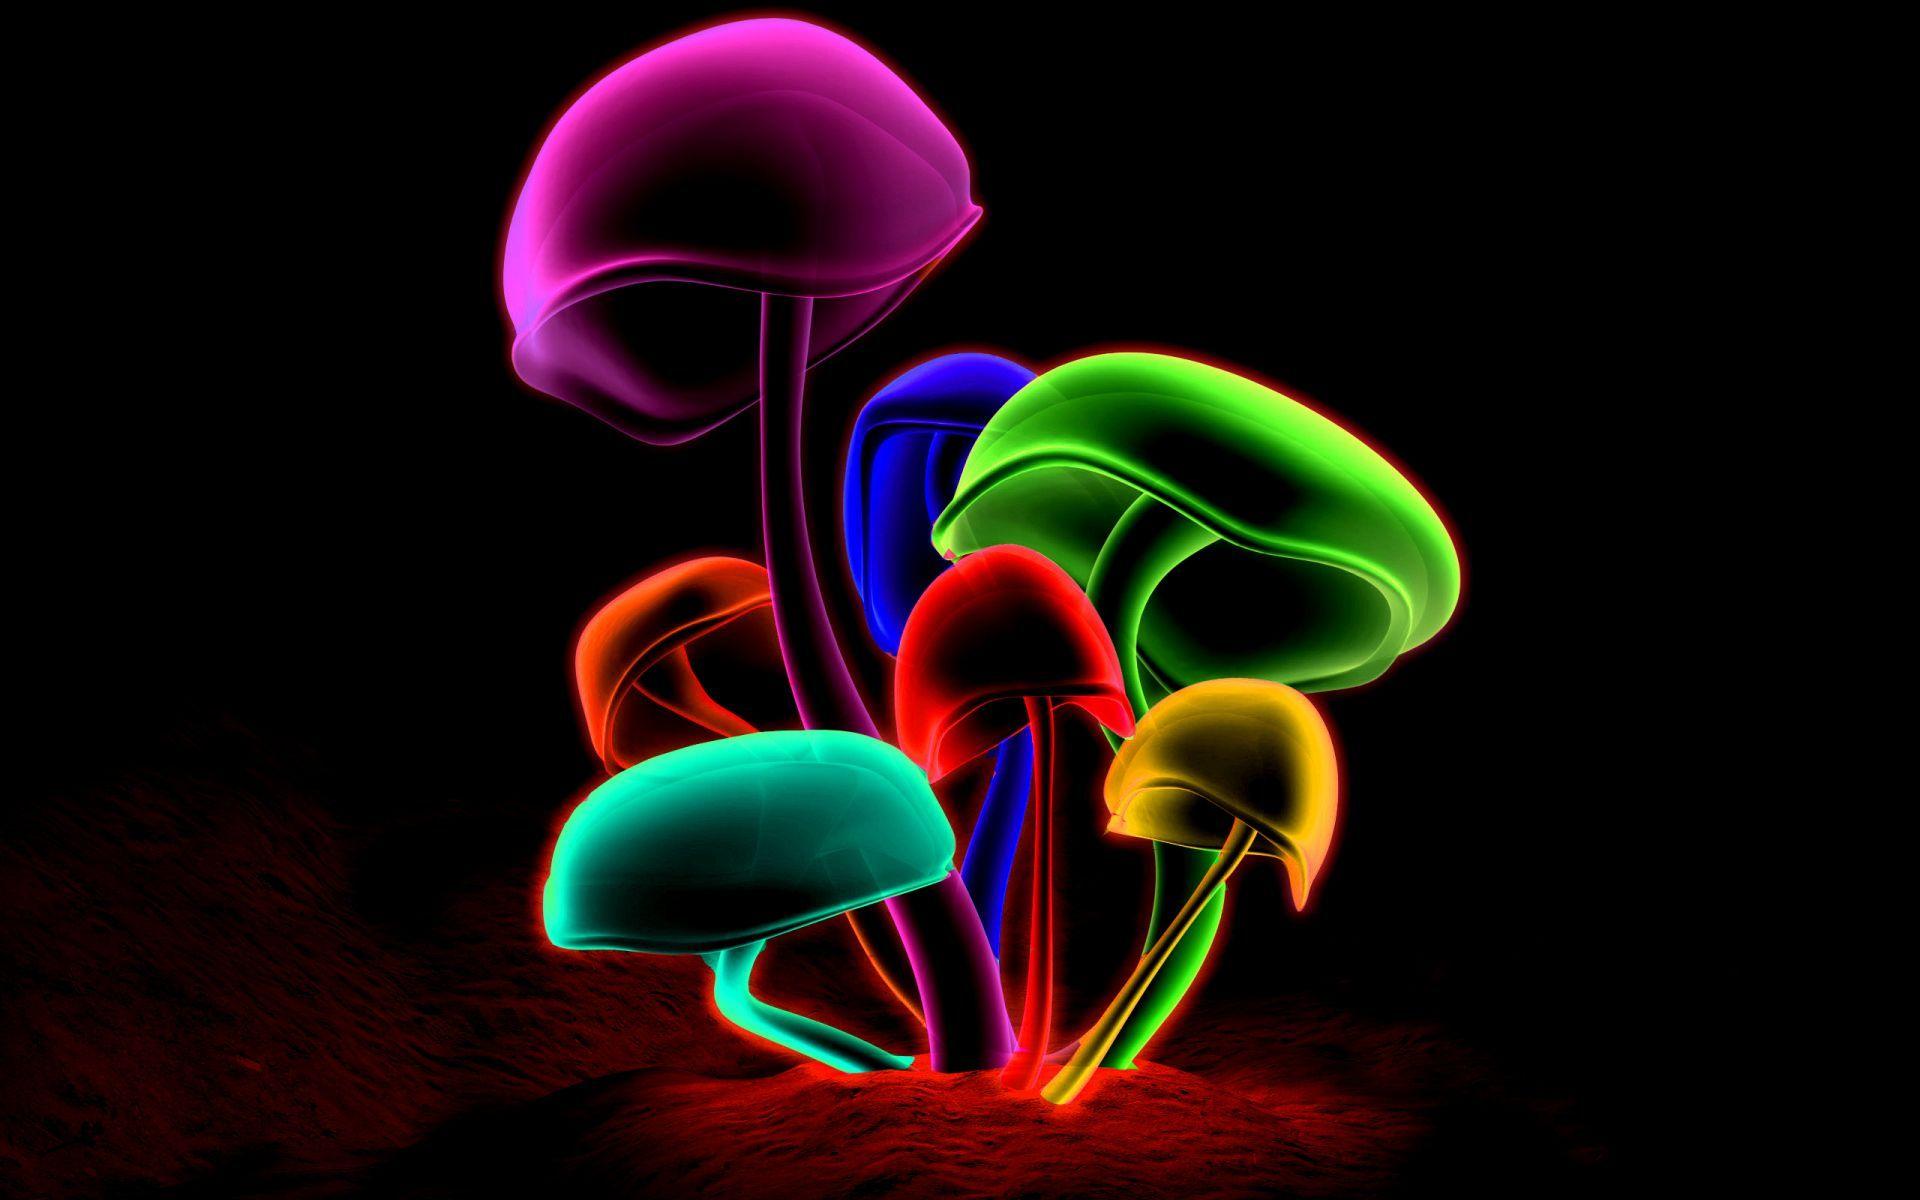 3D Multi Color Glowing Mushrooms Wallpaper. HD 3D And Abstract